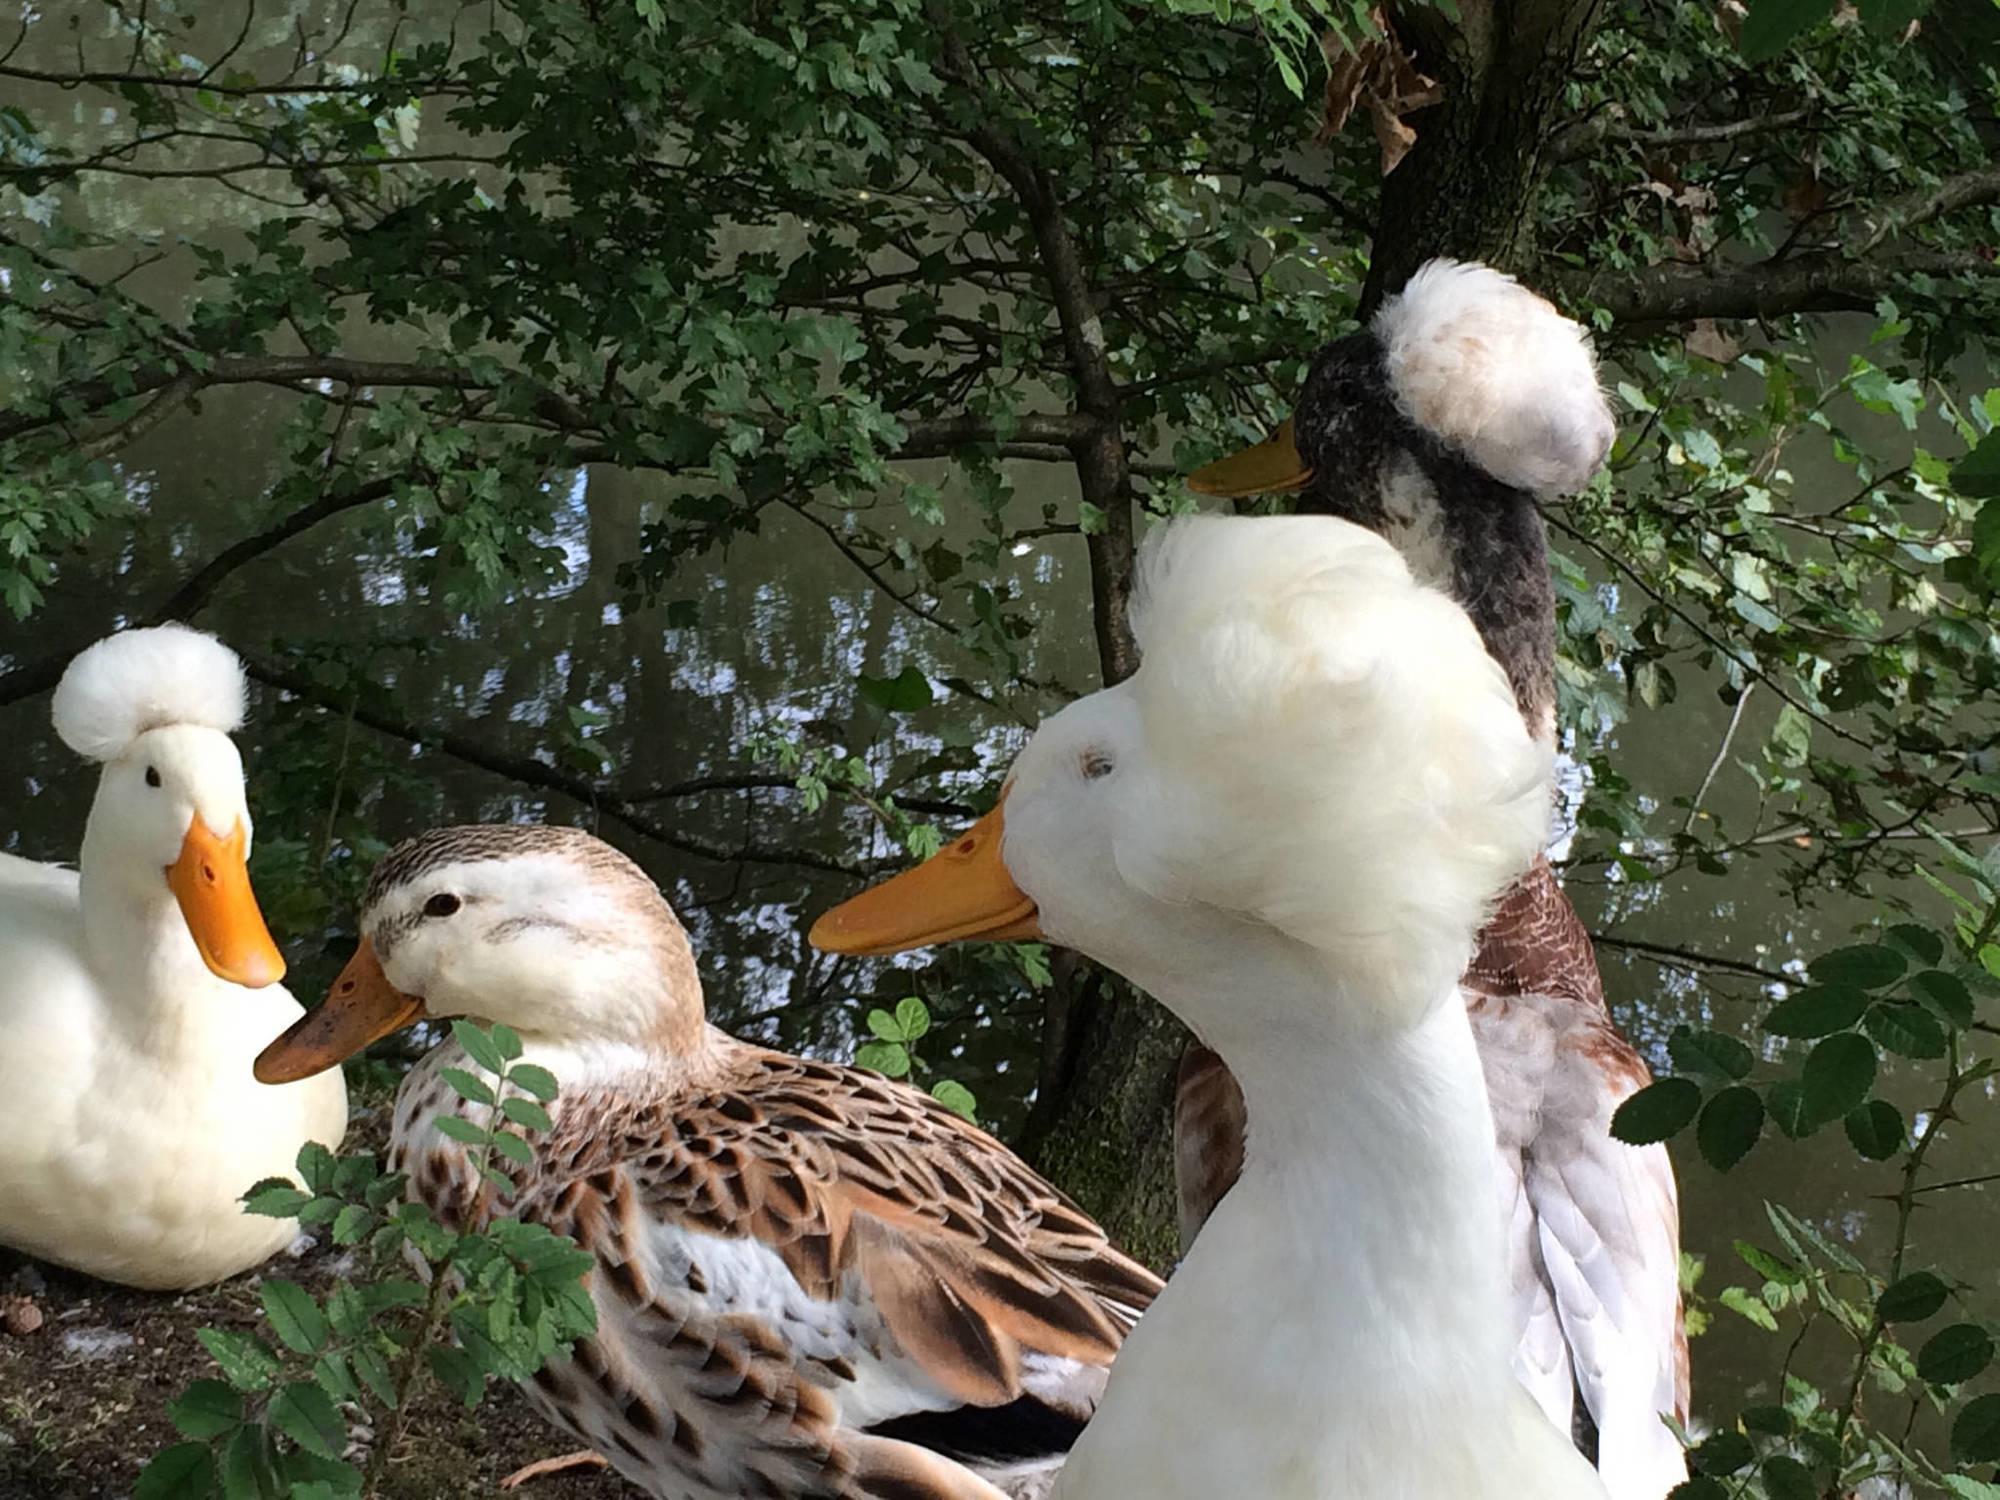 The Crested is a type of domestic duck. Don't they look like George Washington or Dr. Emmett Brown?